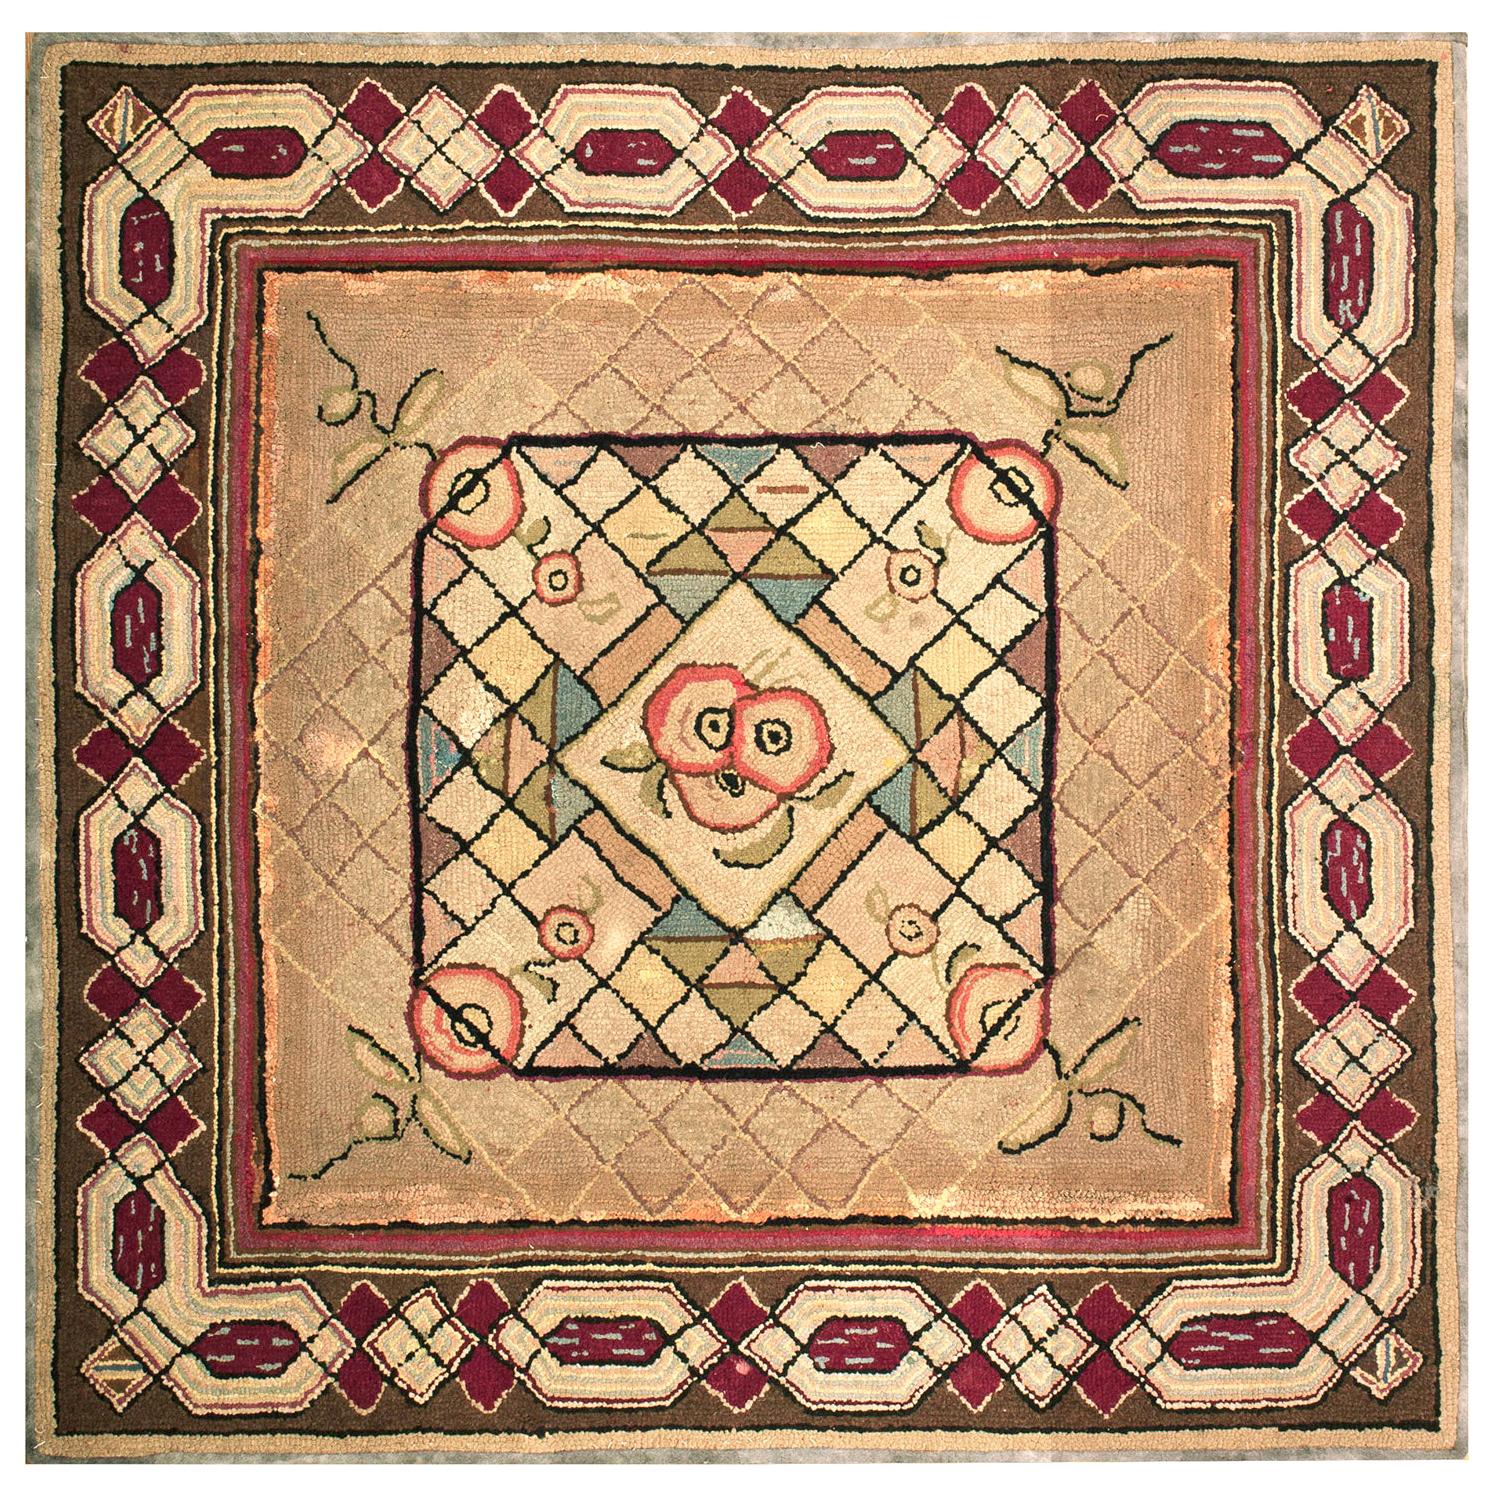 Antique American Hooked Rug 4' 2" x 4' 2"